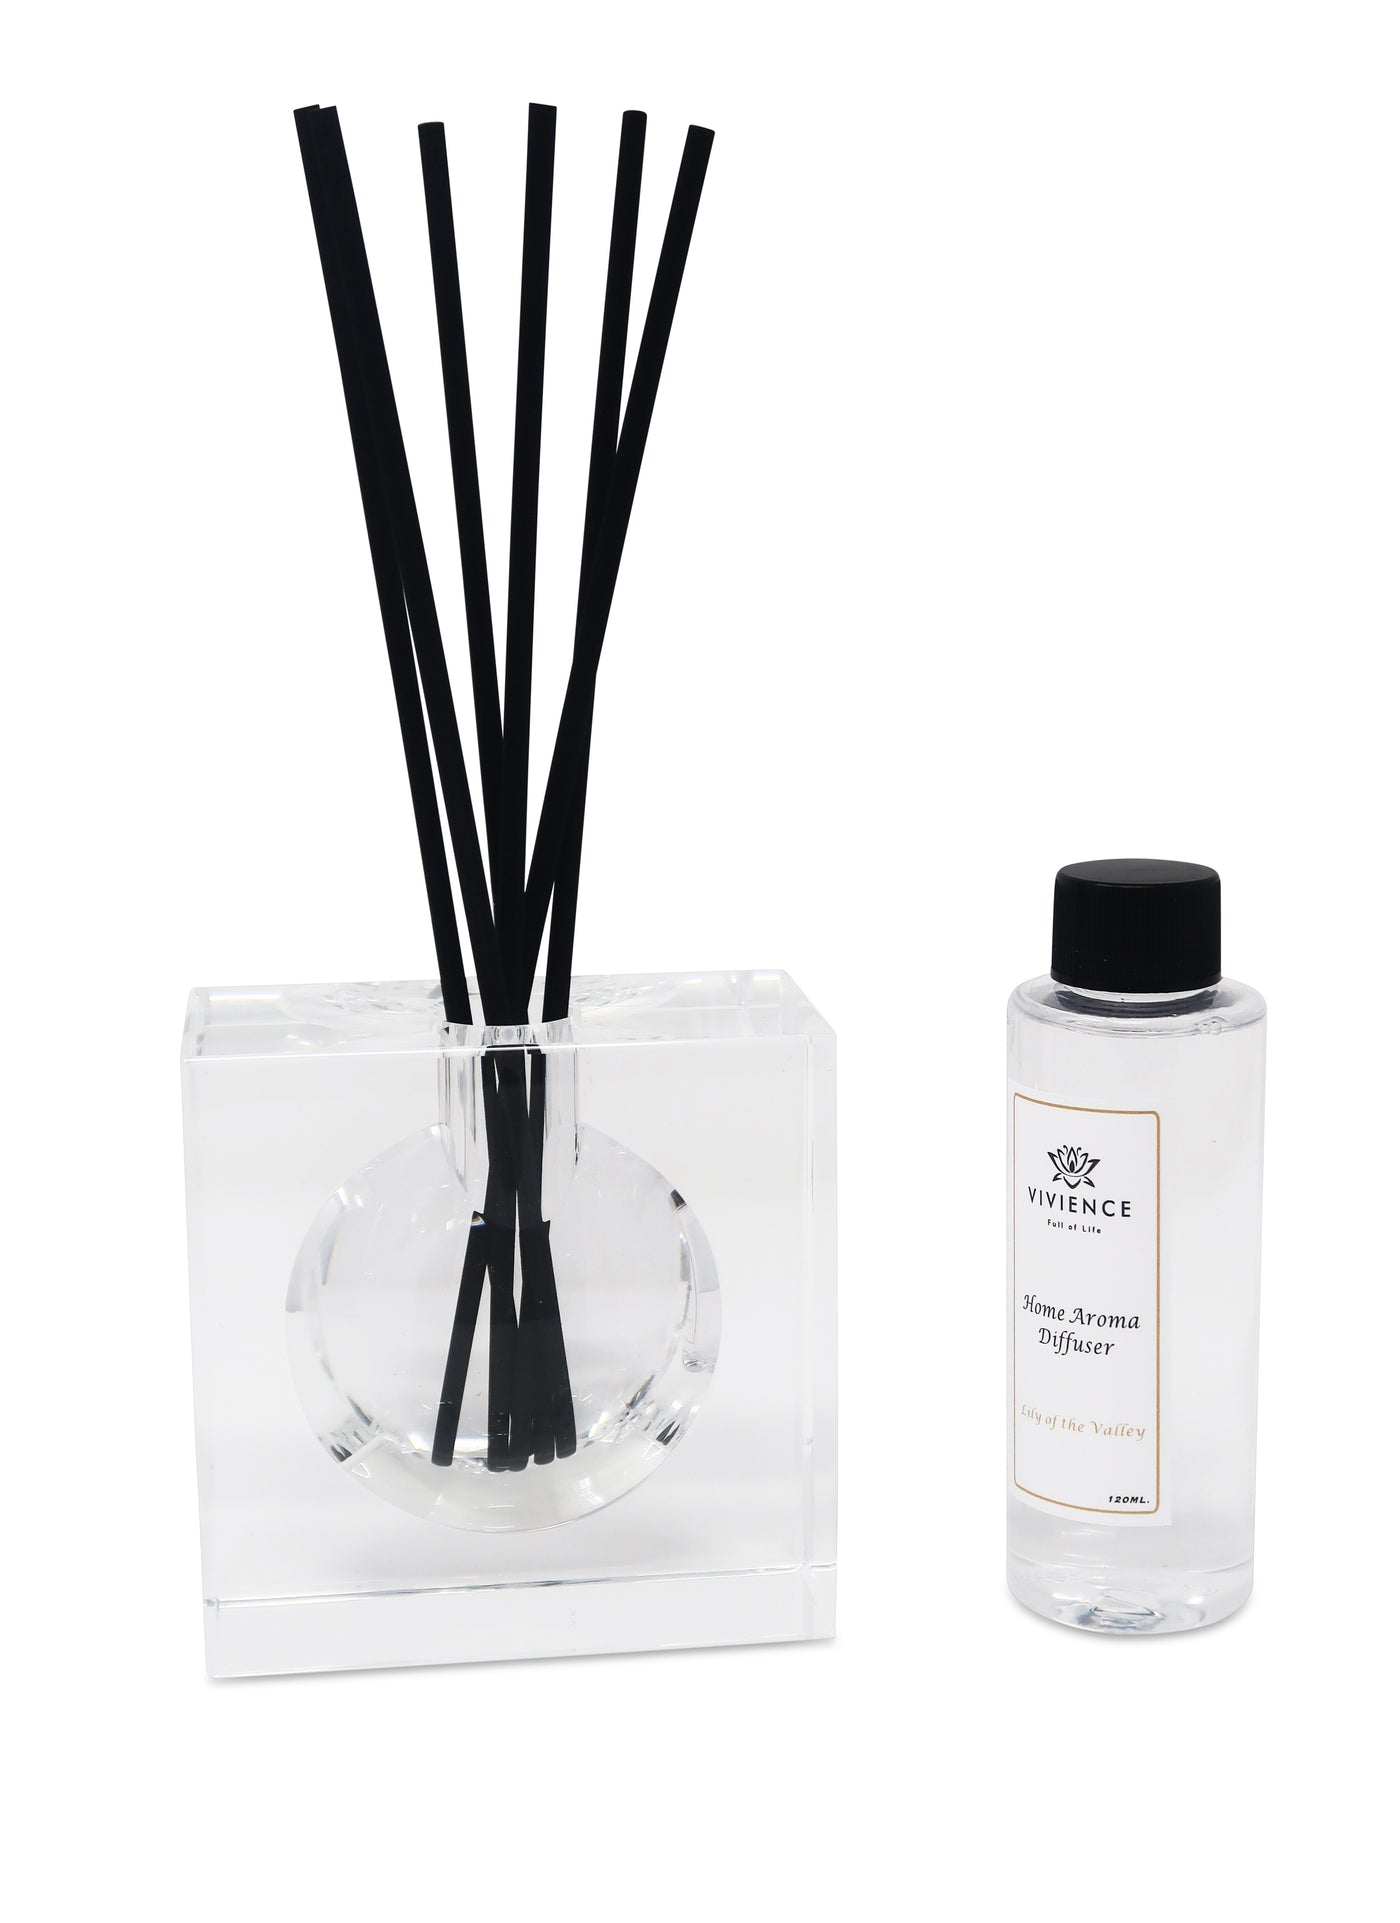 Crystal Diffuser with Black Reeds